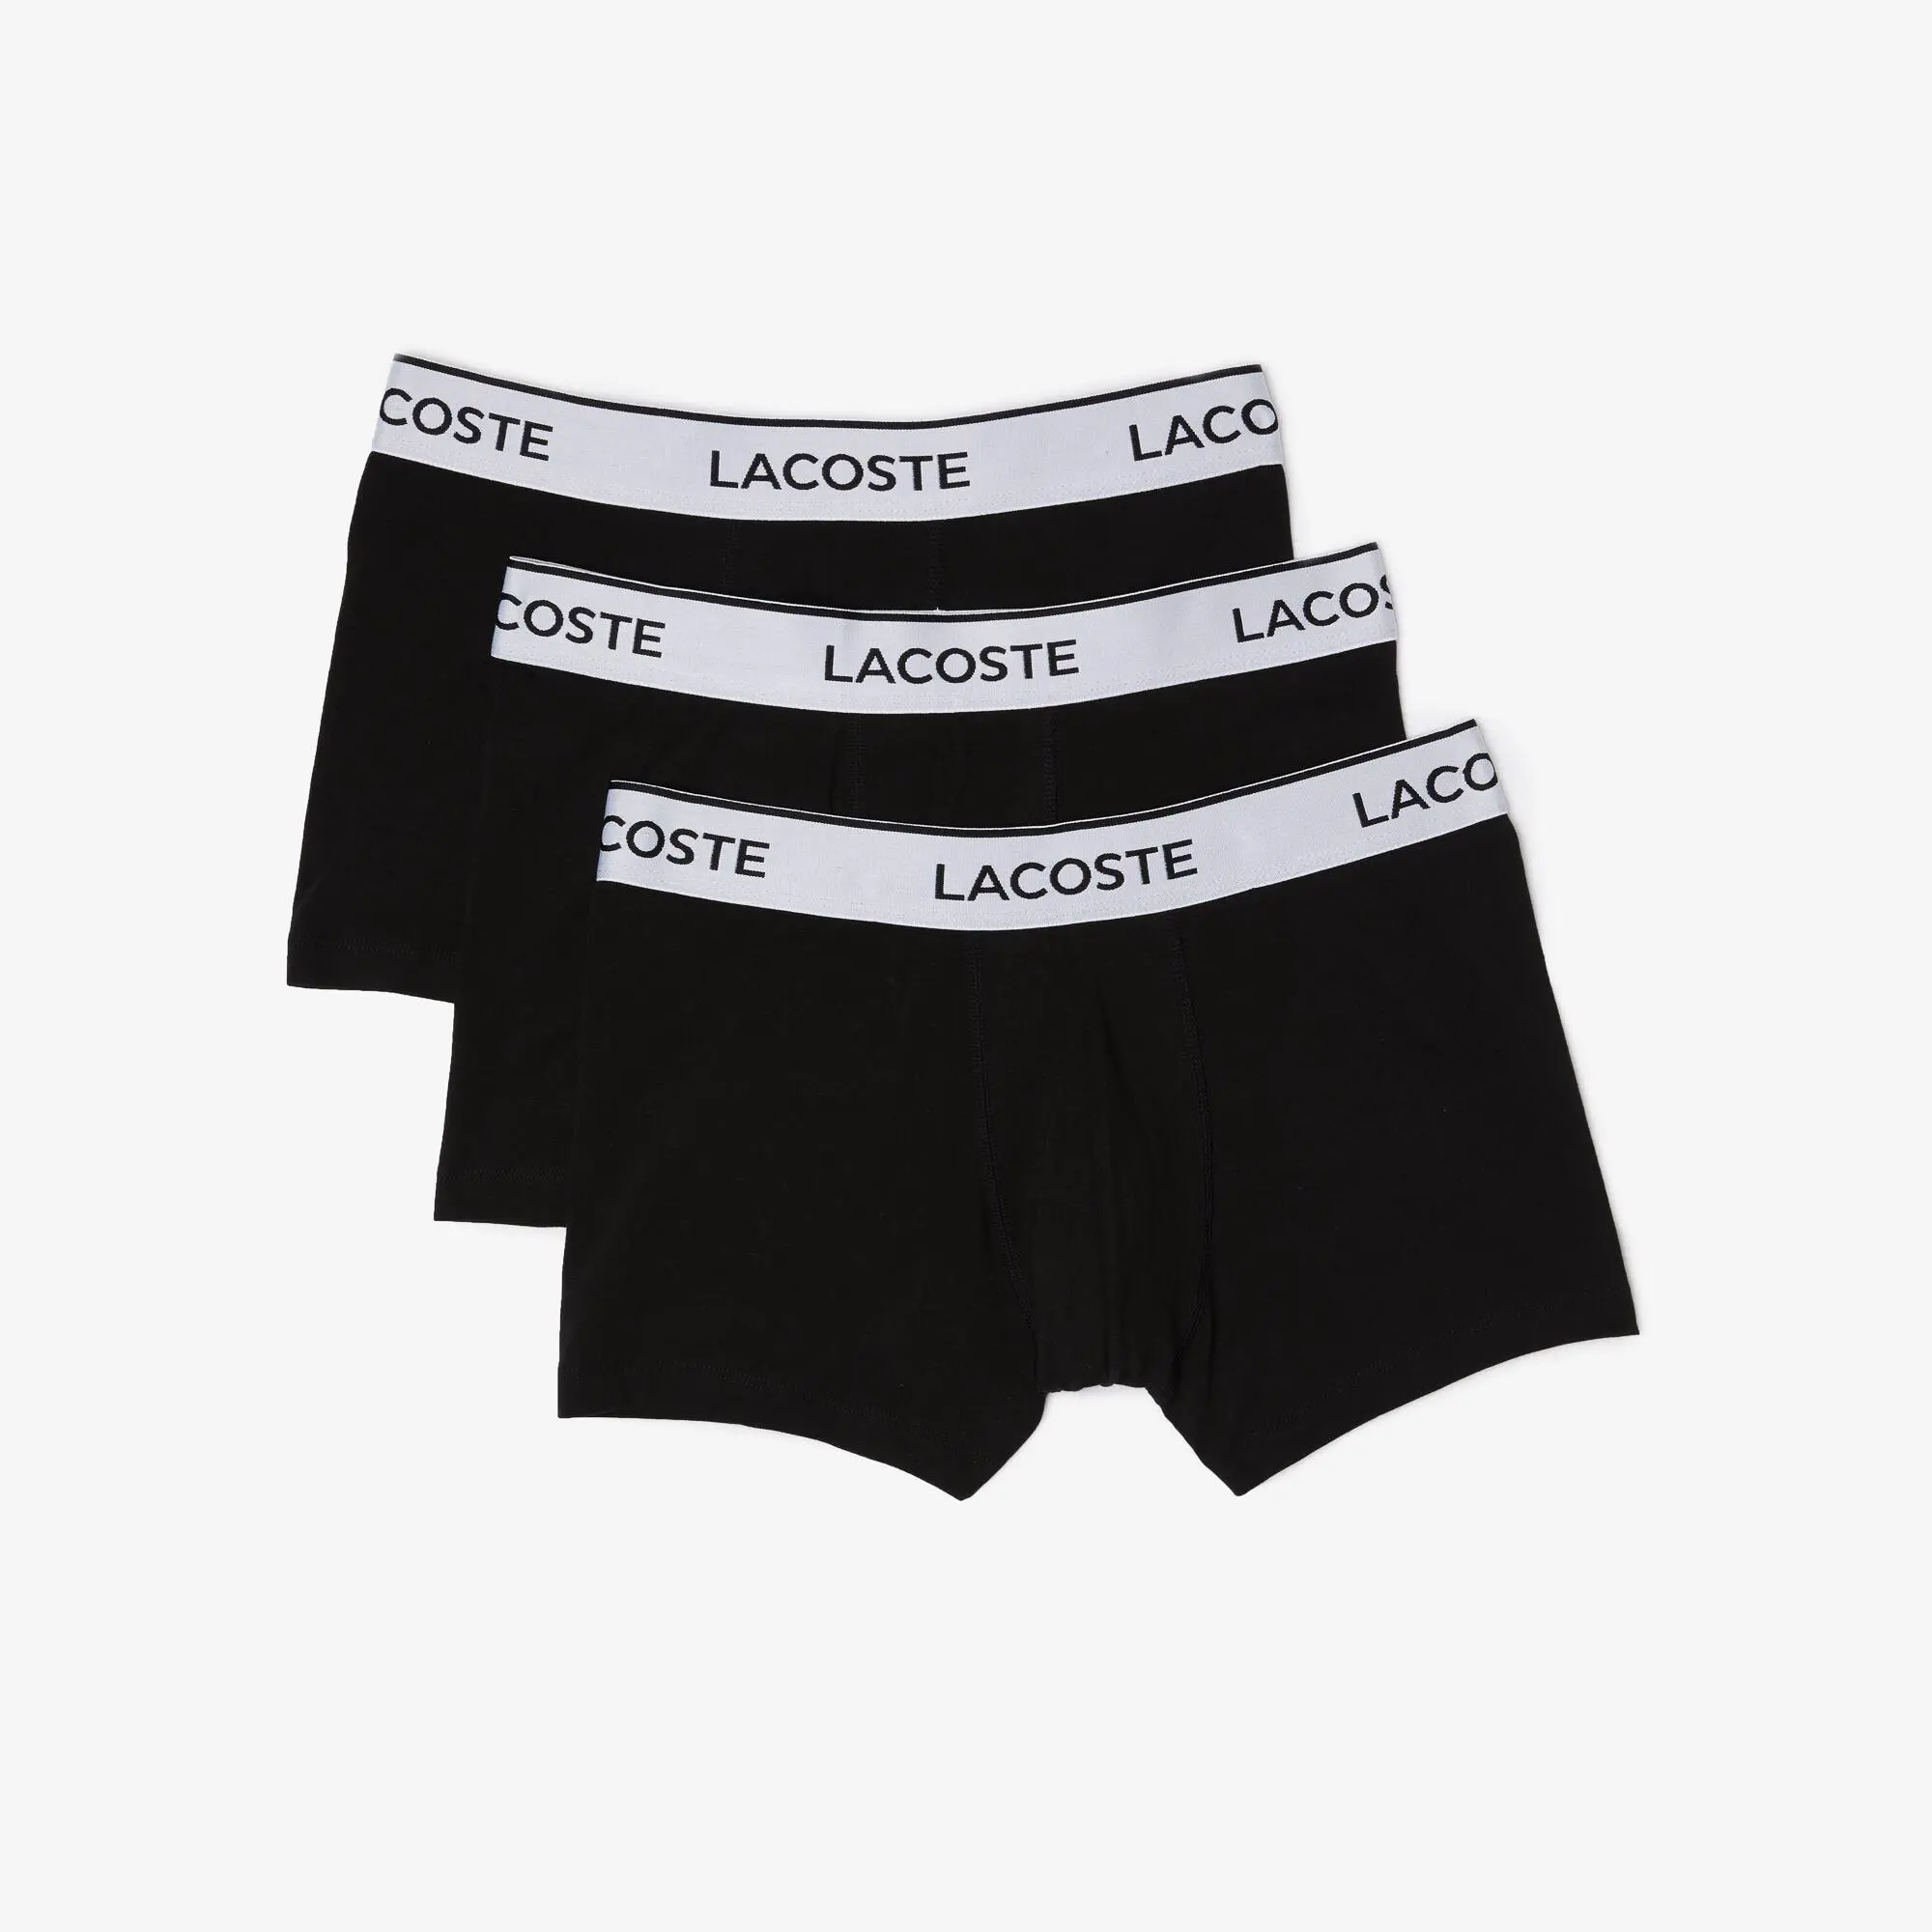 Lacoste Men's Lacoste Contrast Waistband Trunk Three-Pack. 2